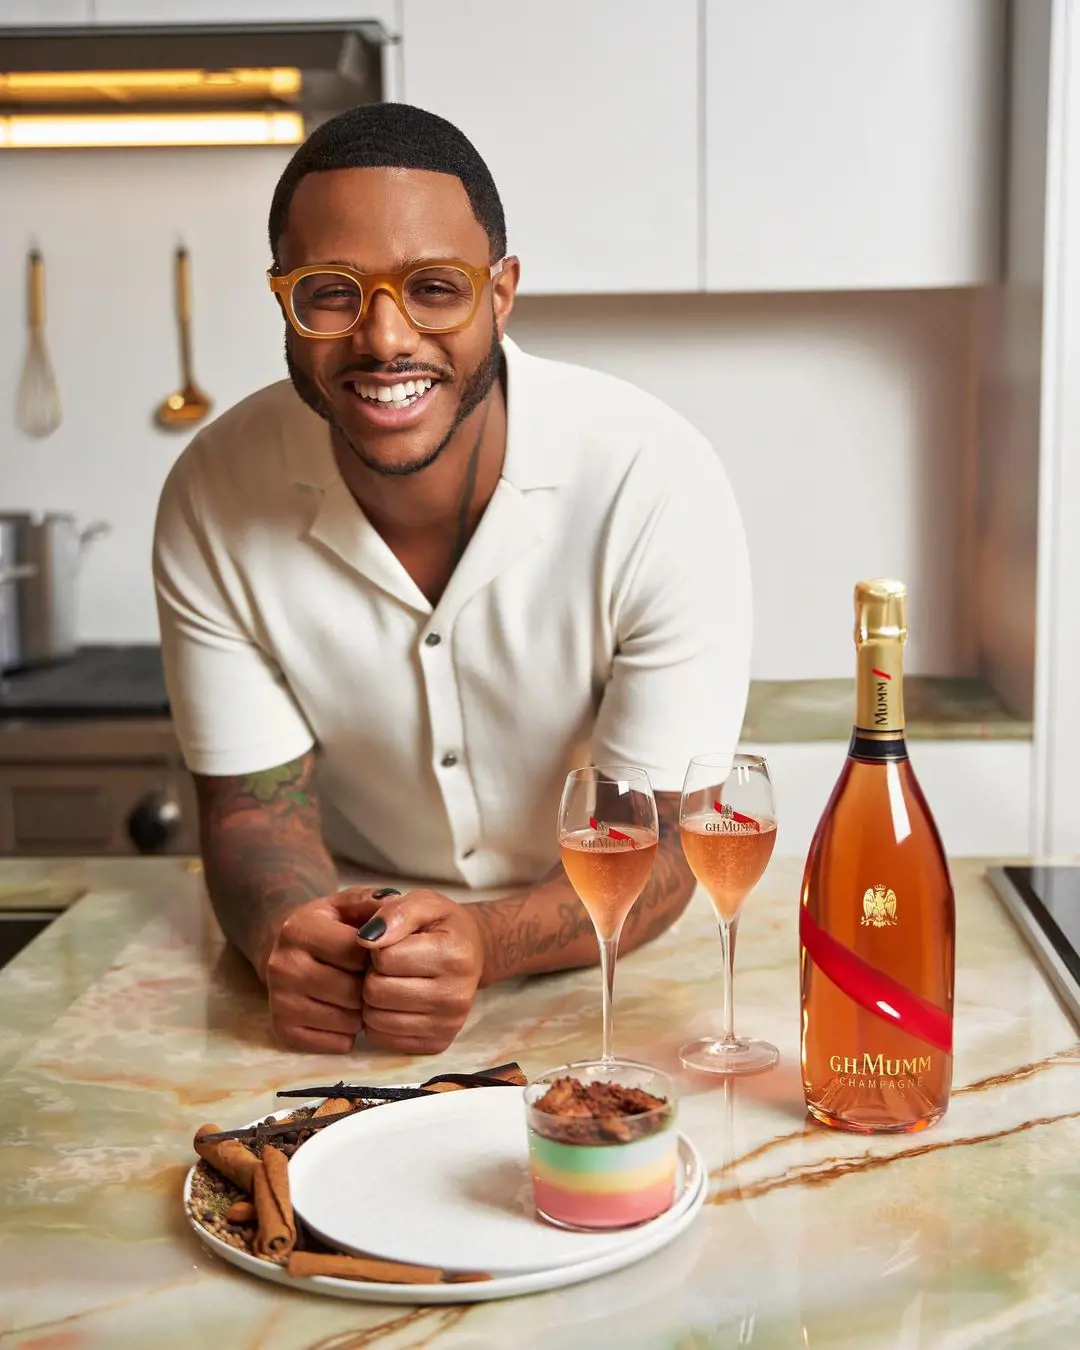 Kwame shares a dessert recipe Rainbow Cookie Panna Cotta paired with @ghmumm_us Grand Cordon Rosé